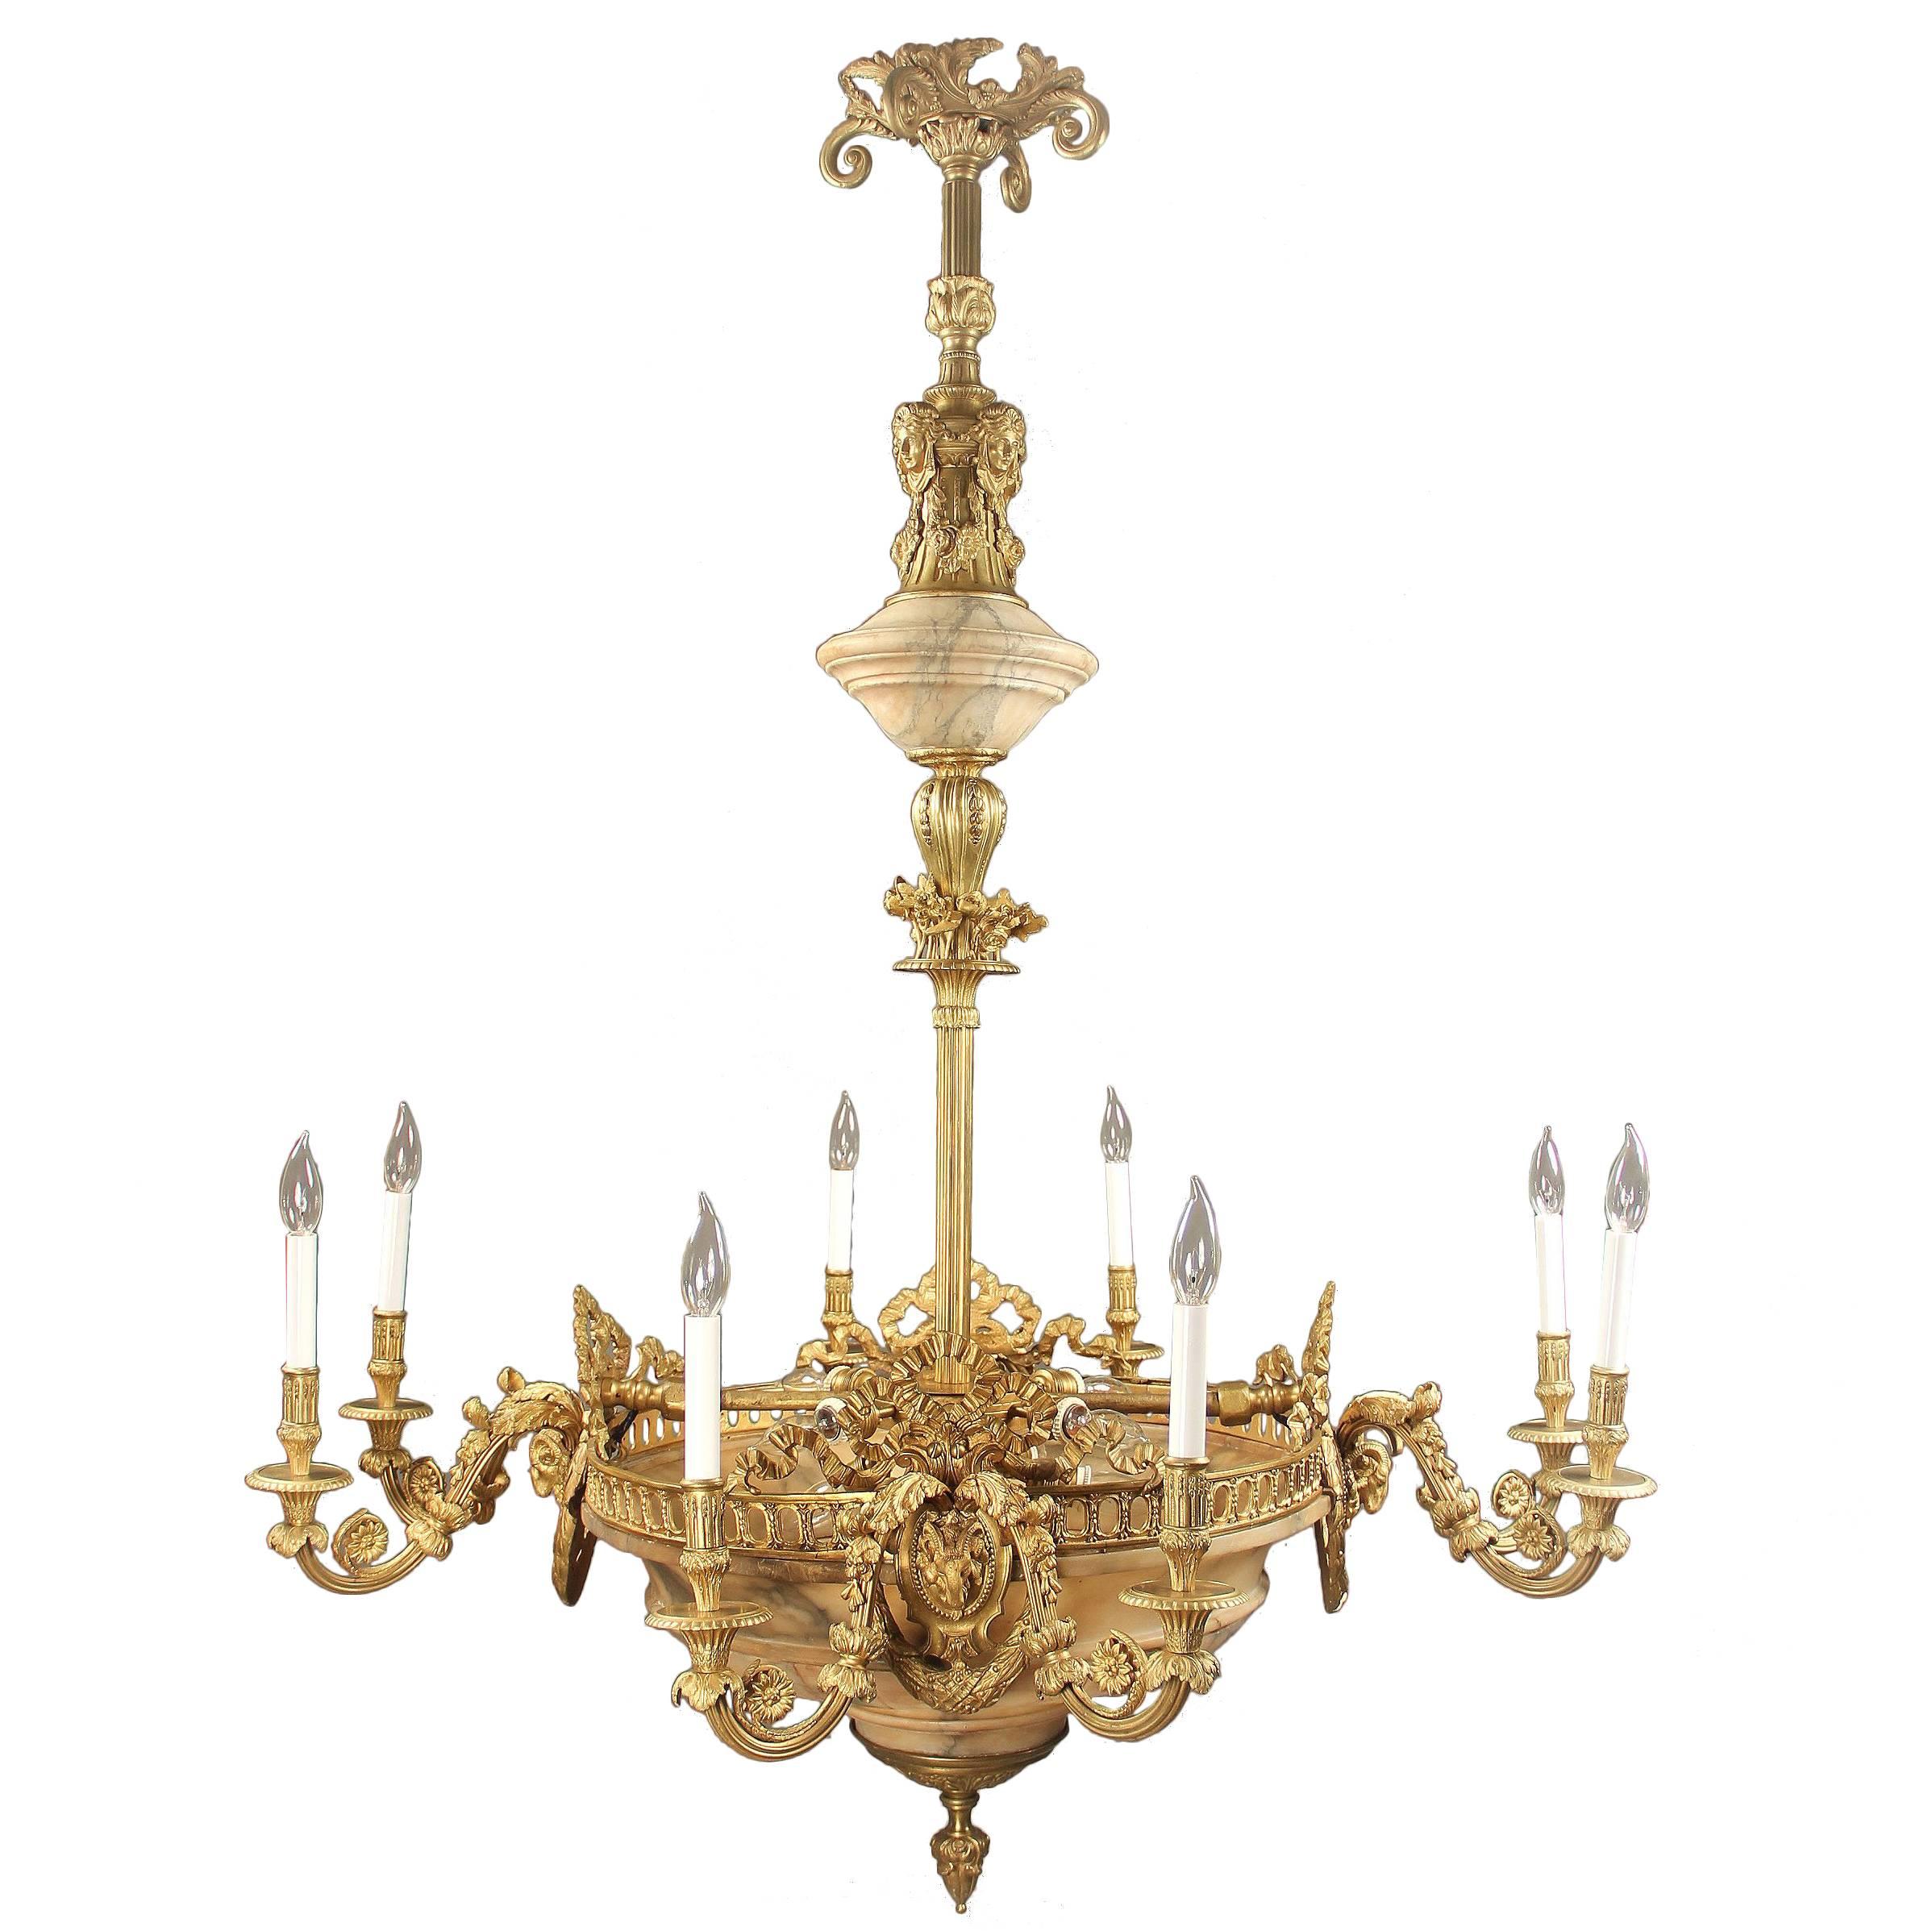 A Nice Late 19th Century Gilt Bronze and Alabaster 16-Light Chandelier